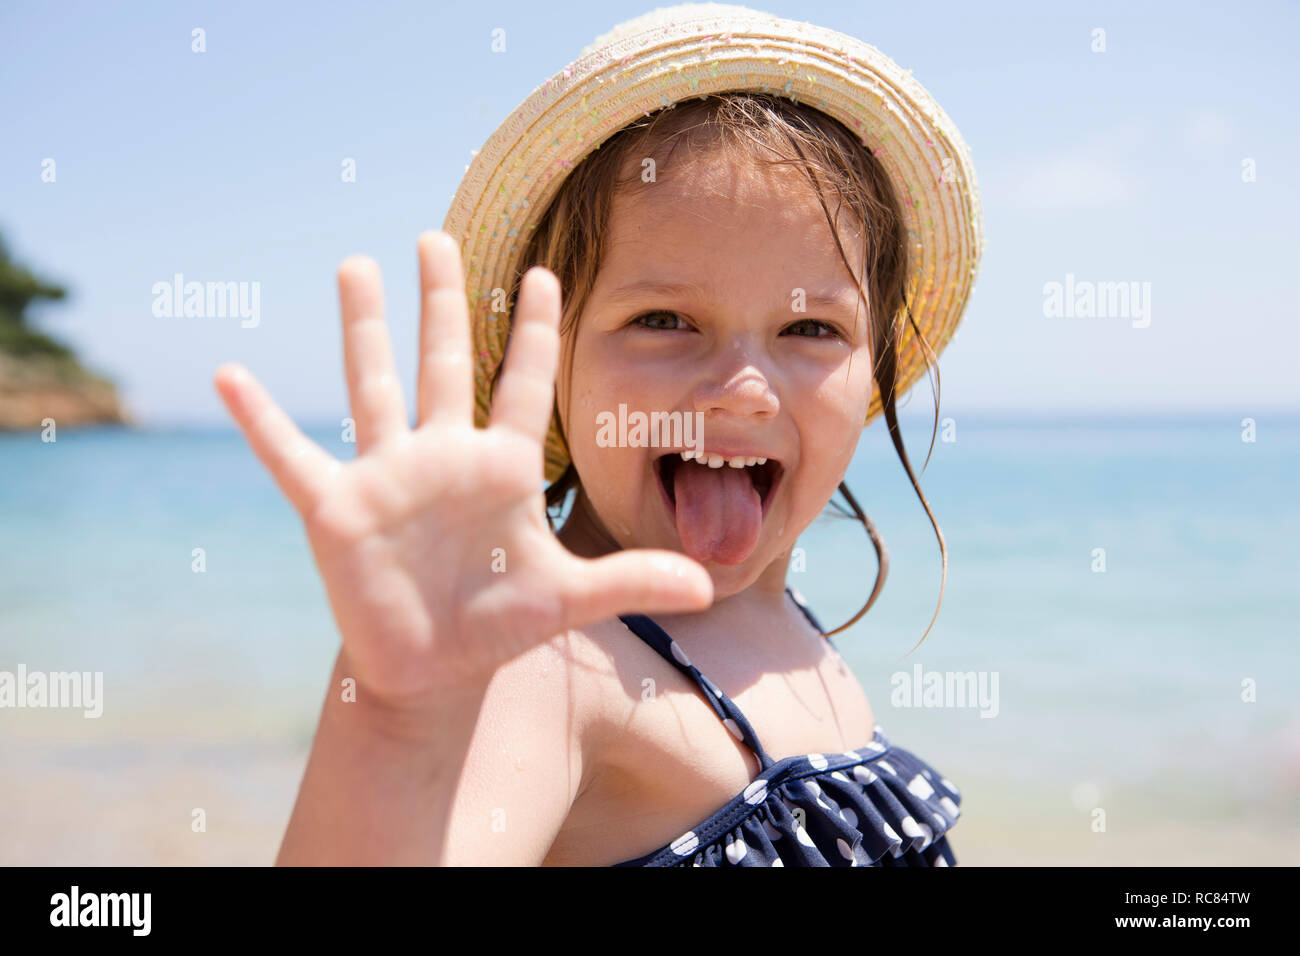 Girl in sunhat sticking out her tongue, portrait, Scopello, Sicily, Italy Stock Photo